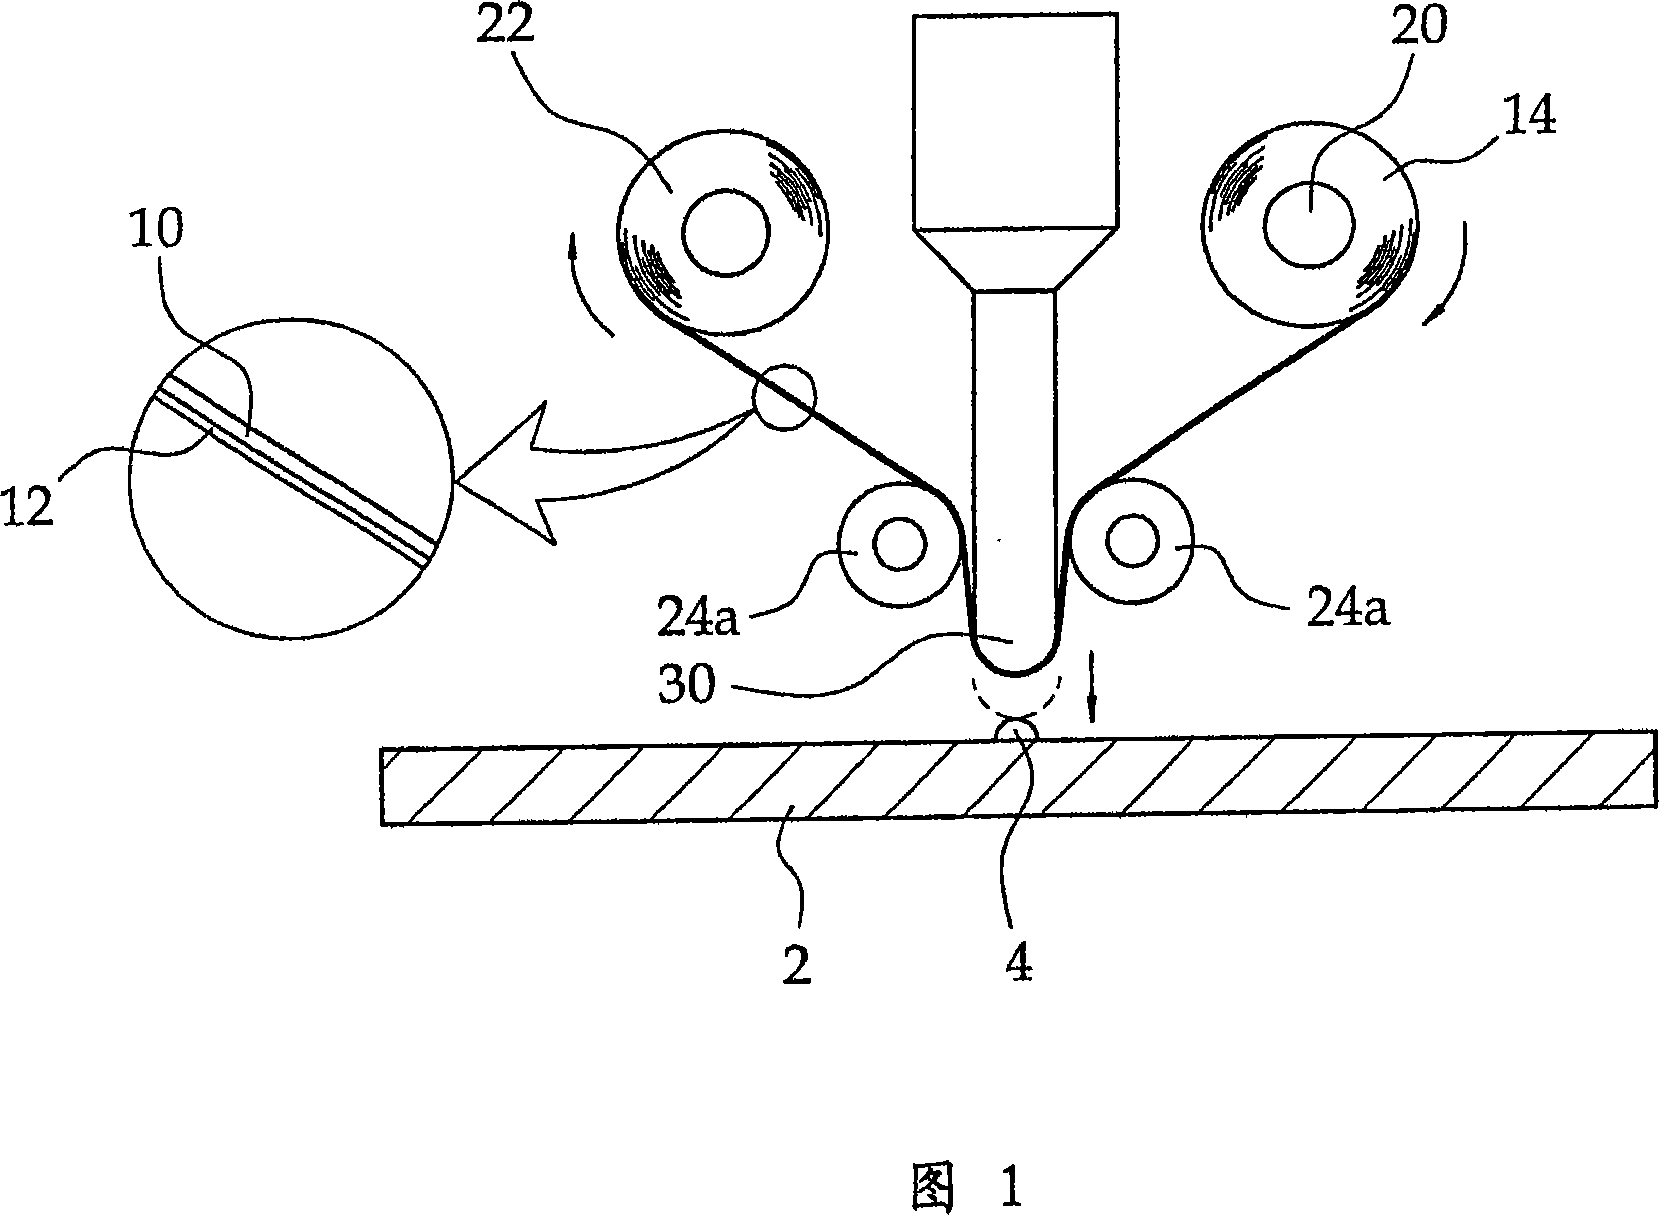 Substrate repairing device and method